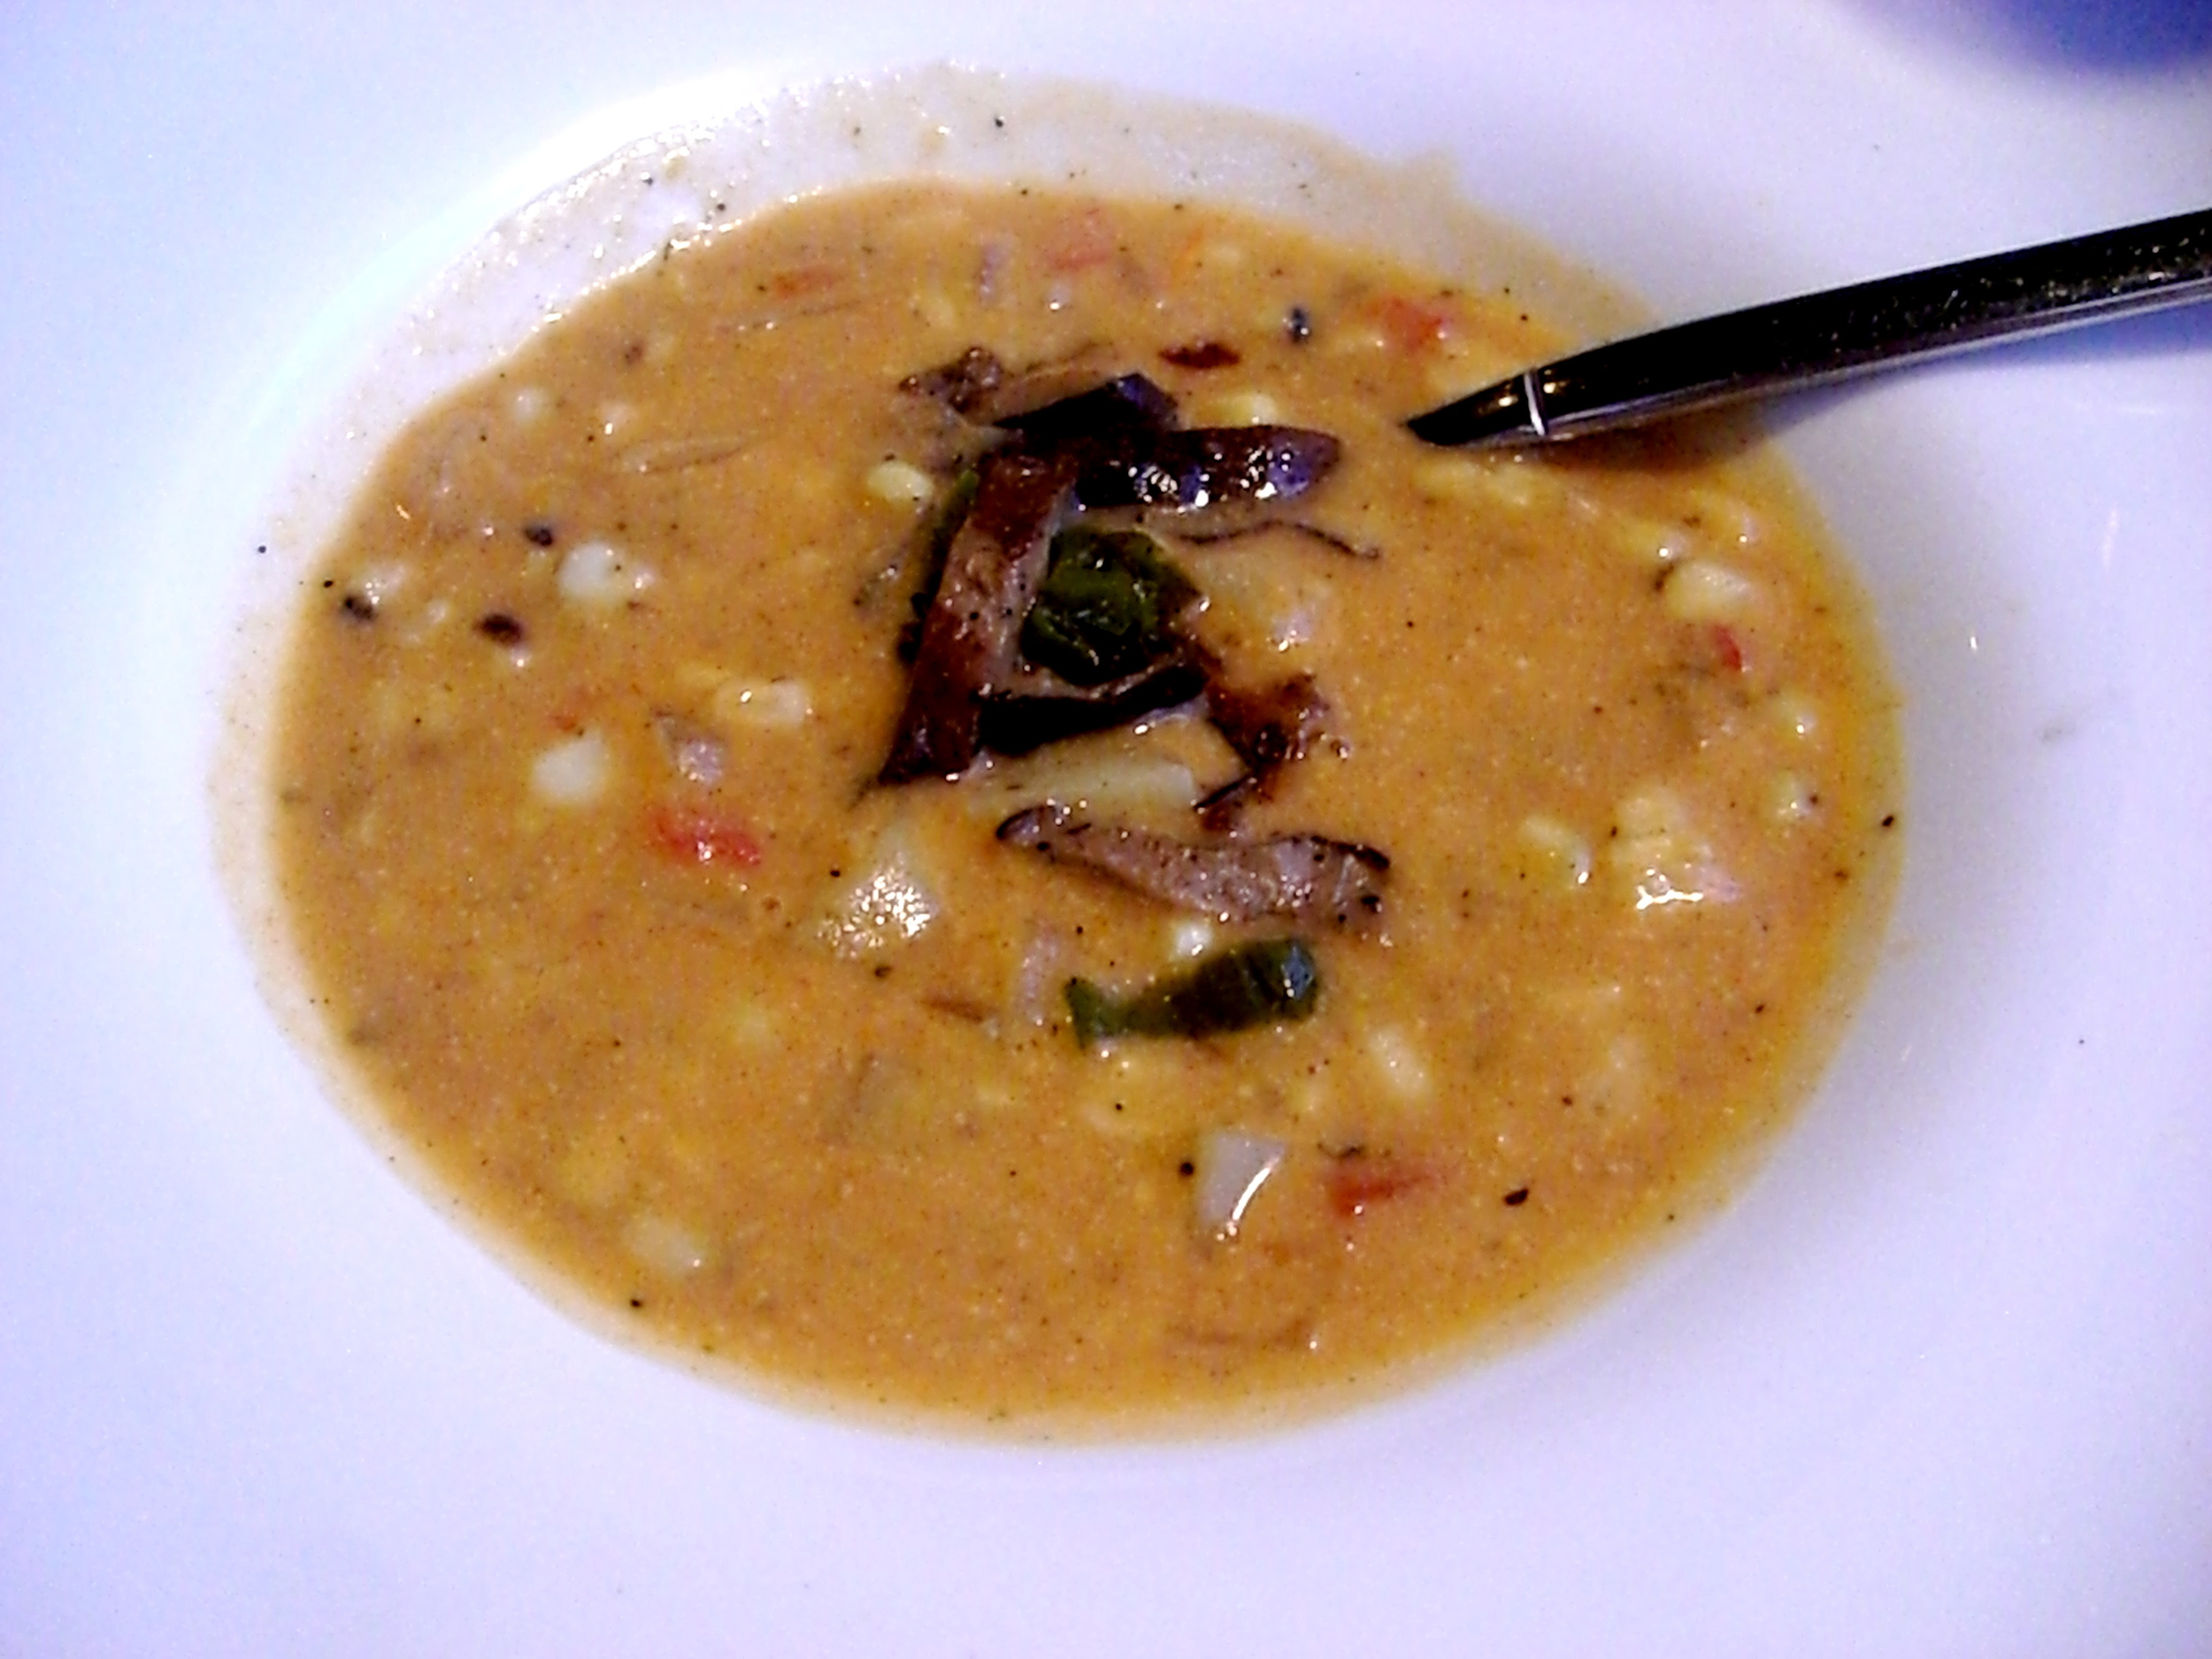 This vegan roasted corn chowder was totally tasty.